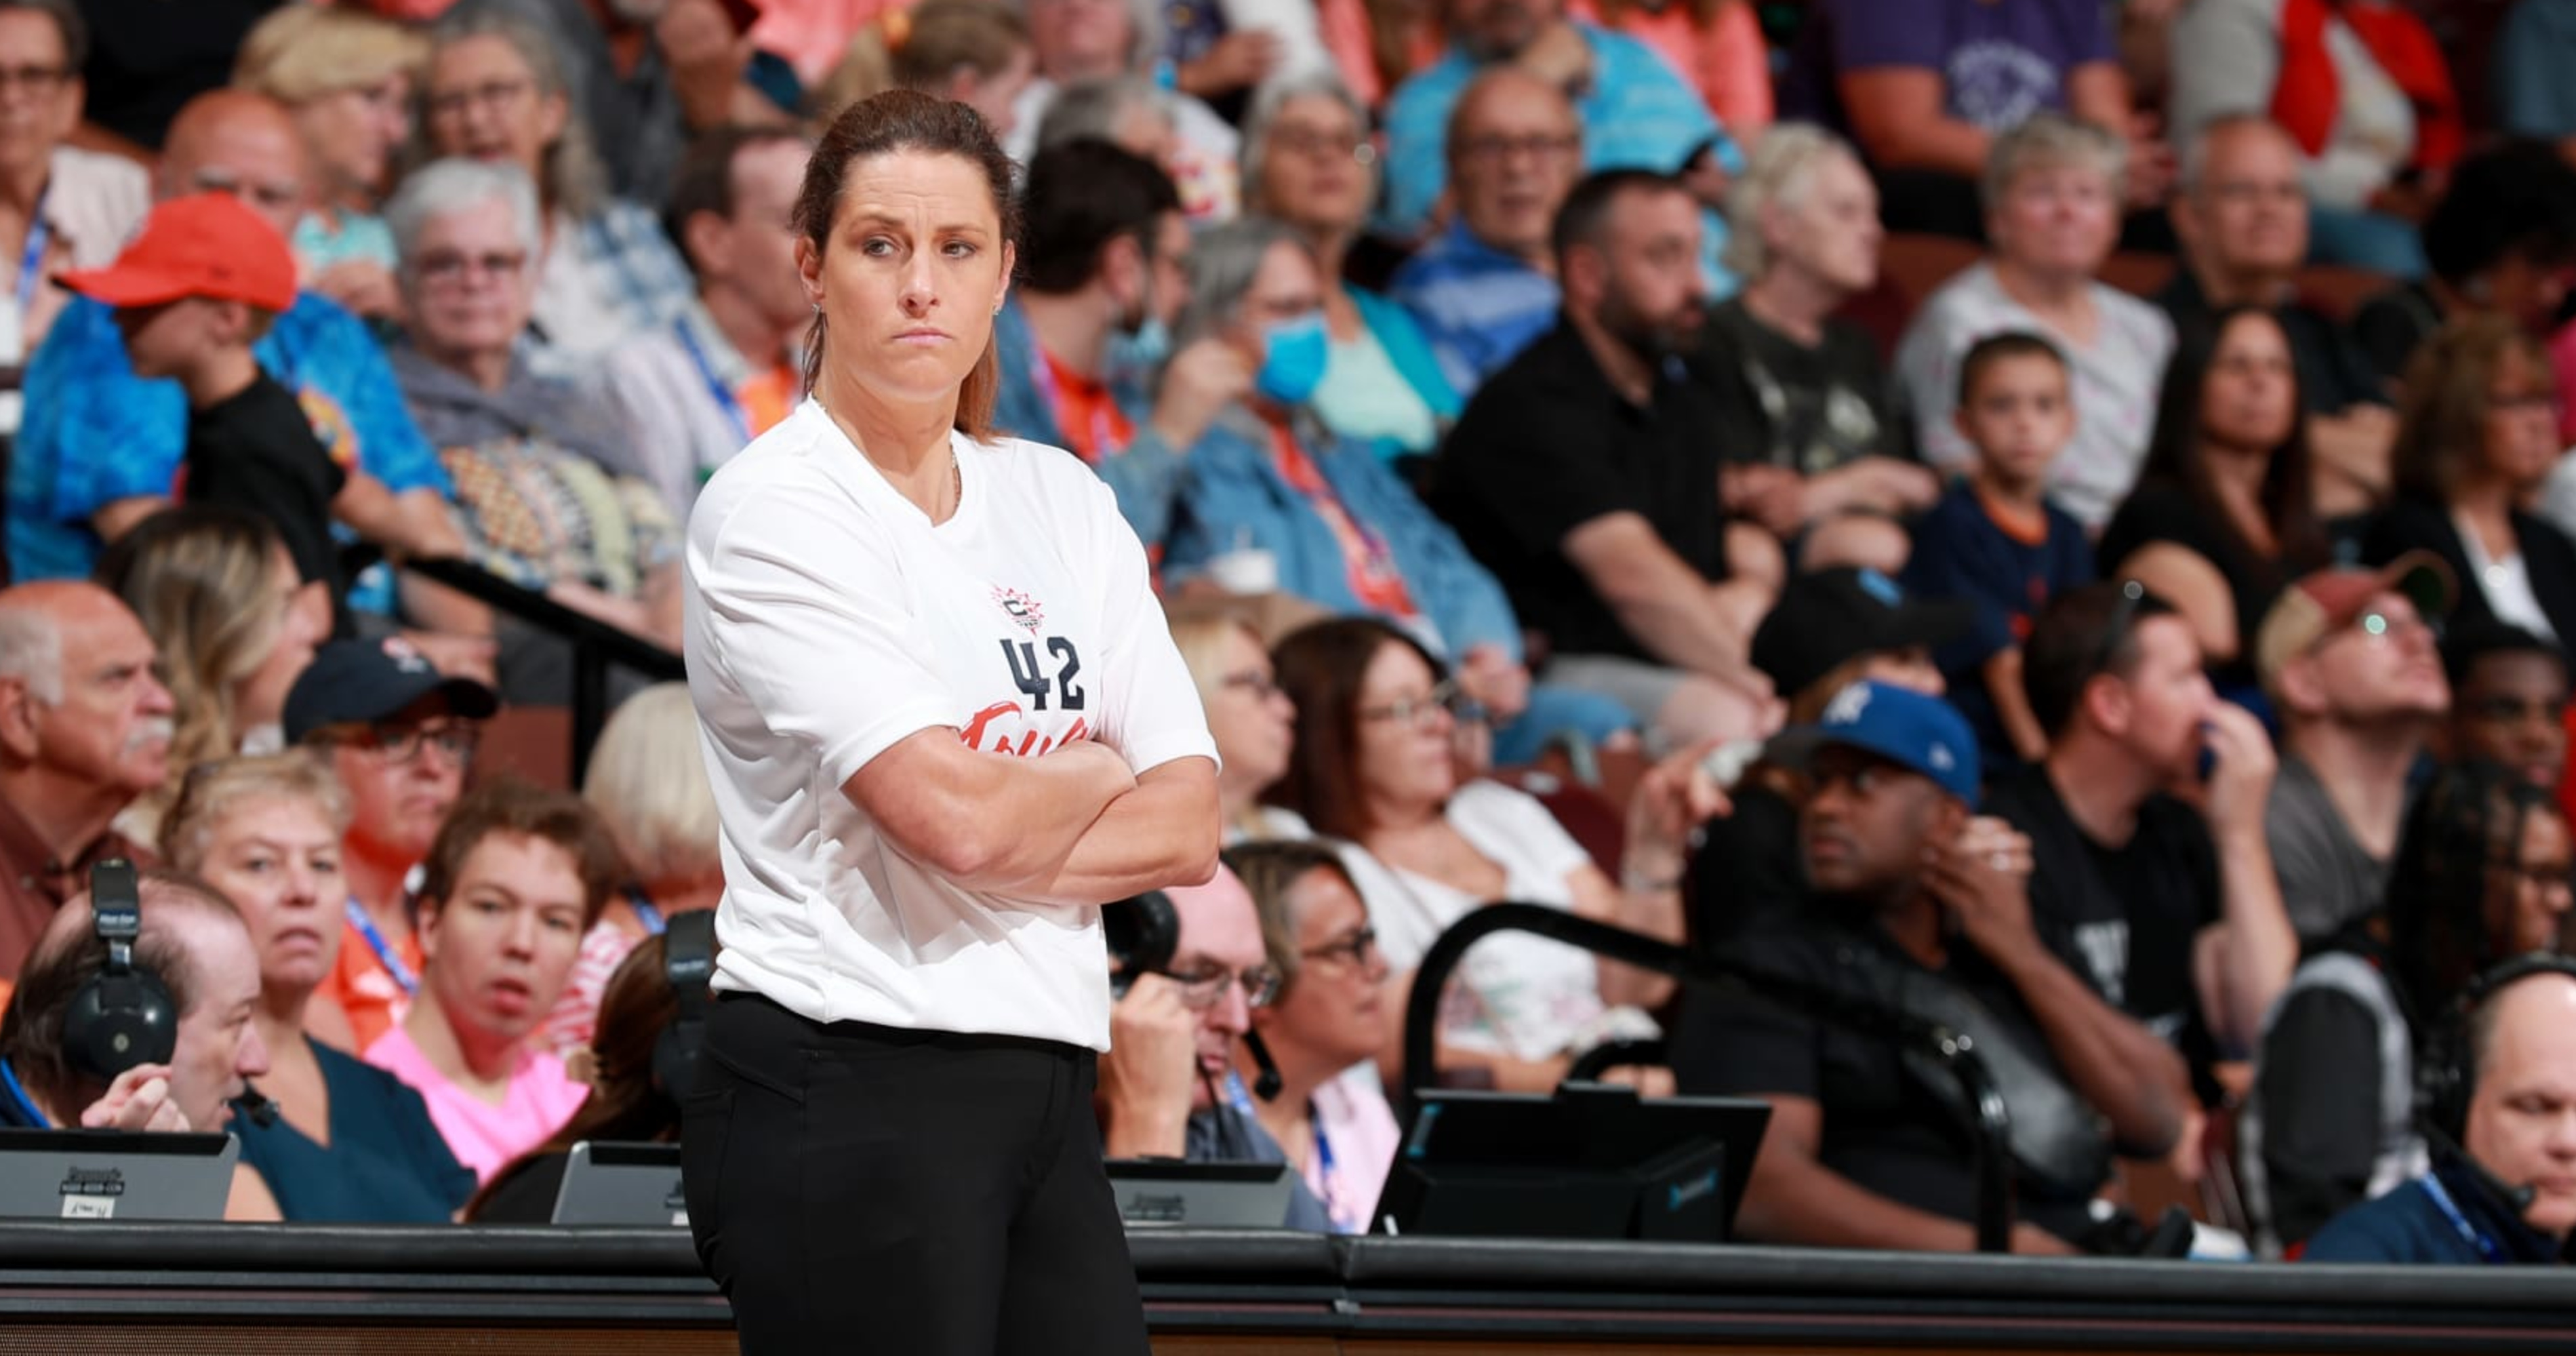 Sun's Stephanie White Awarded 2023 WNBA Coach of the Year; Earned 3 Seed in Playoffs